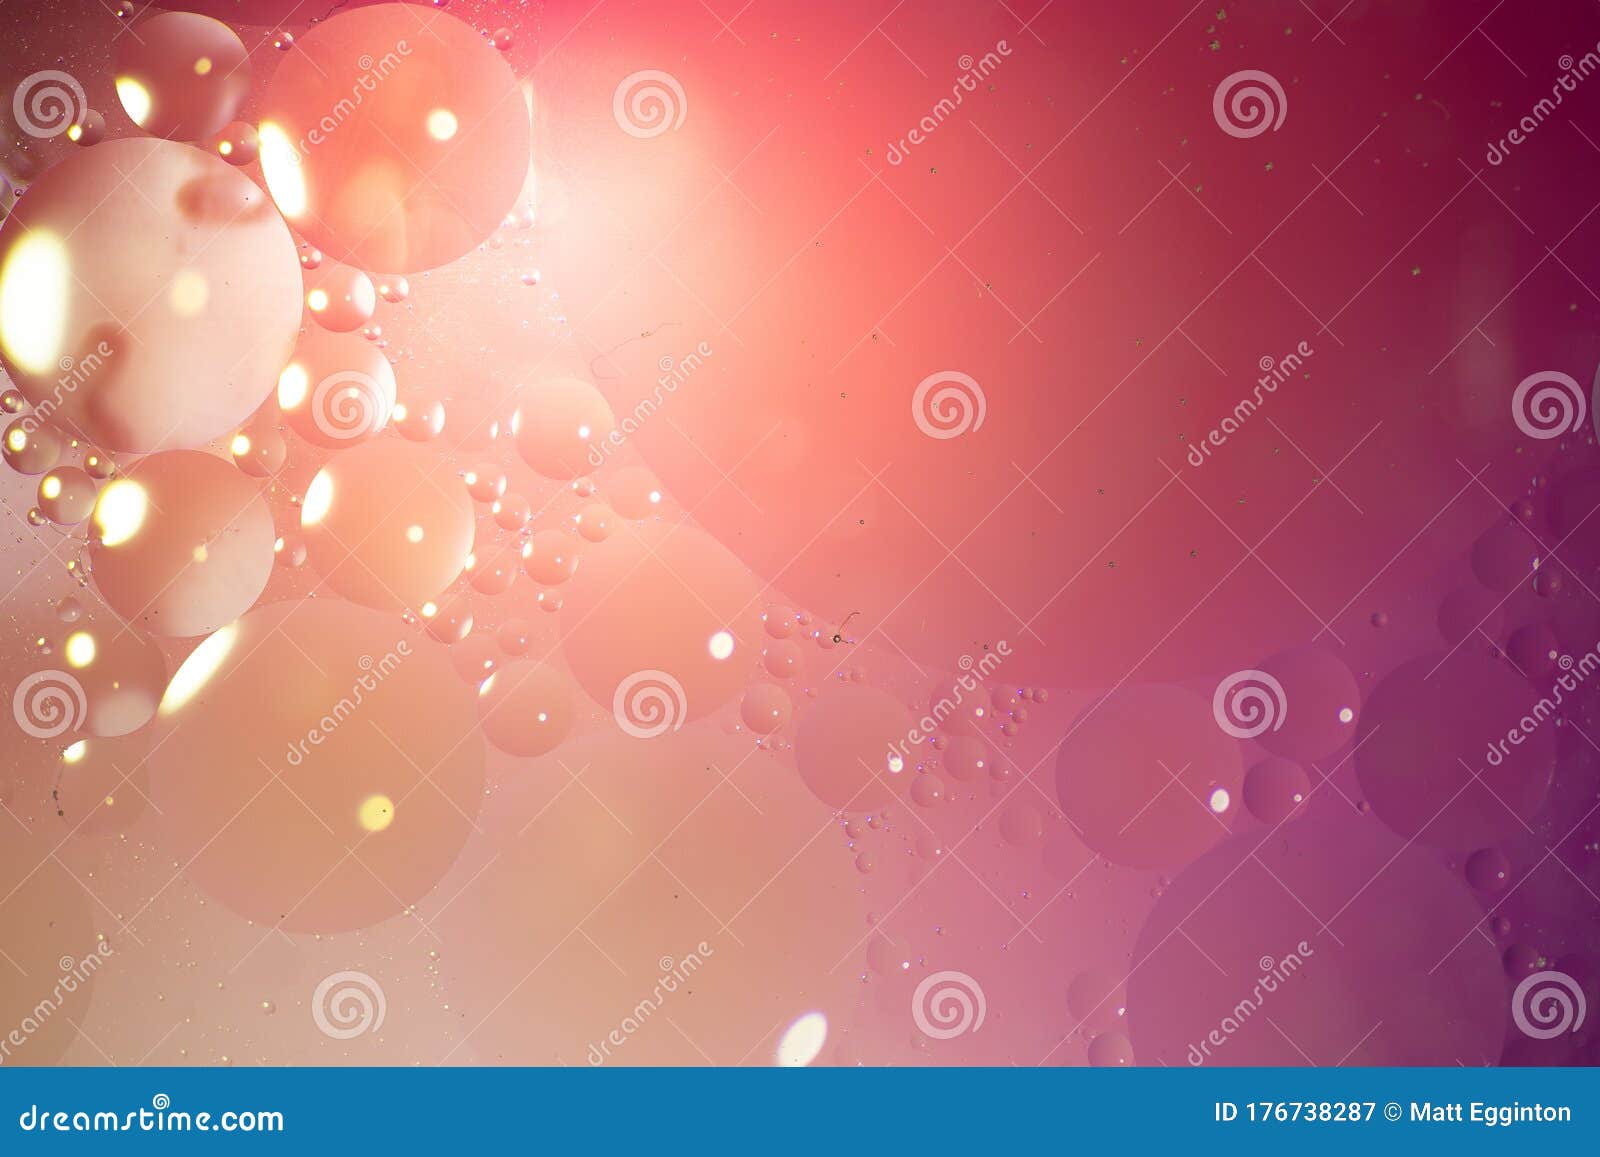 Pink Pastel Background Abstract Stock Image - Image of soft, pink